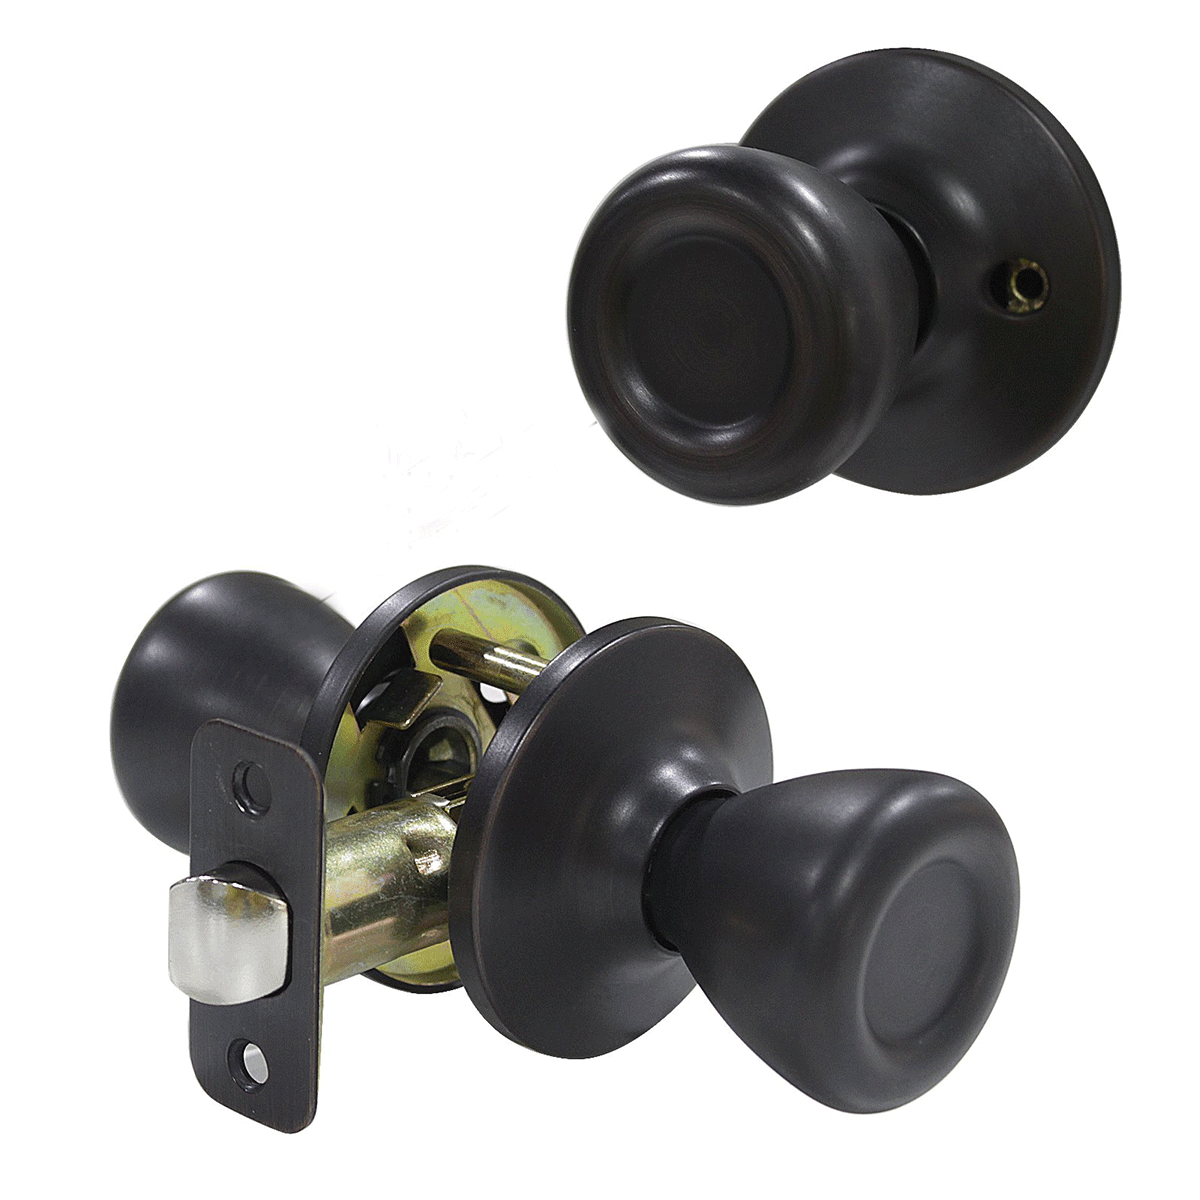 Single Connecting Rod Door Knobs Entrance/Privacy/Passage/Dummy Function Door Lock Knob, Oil Rubbed Bronze Finish